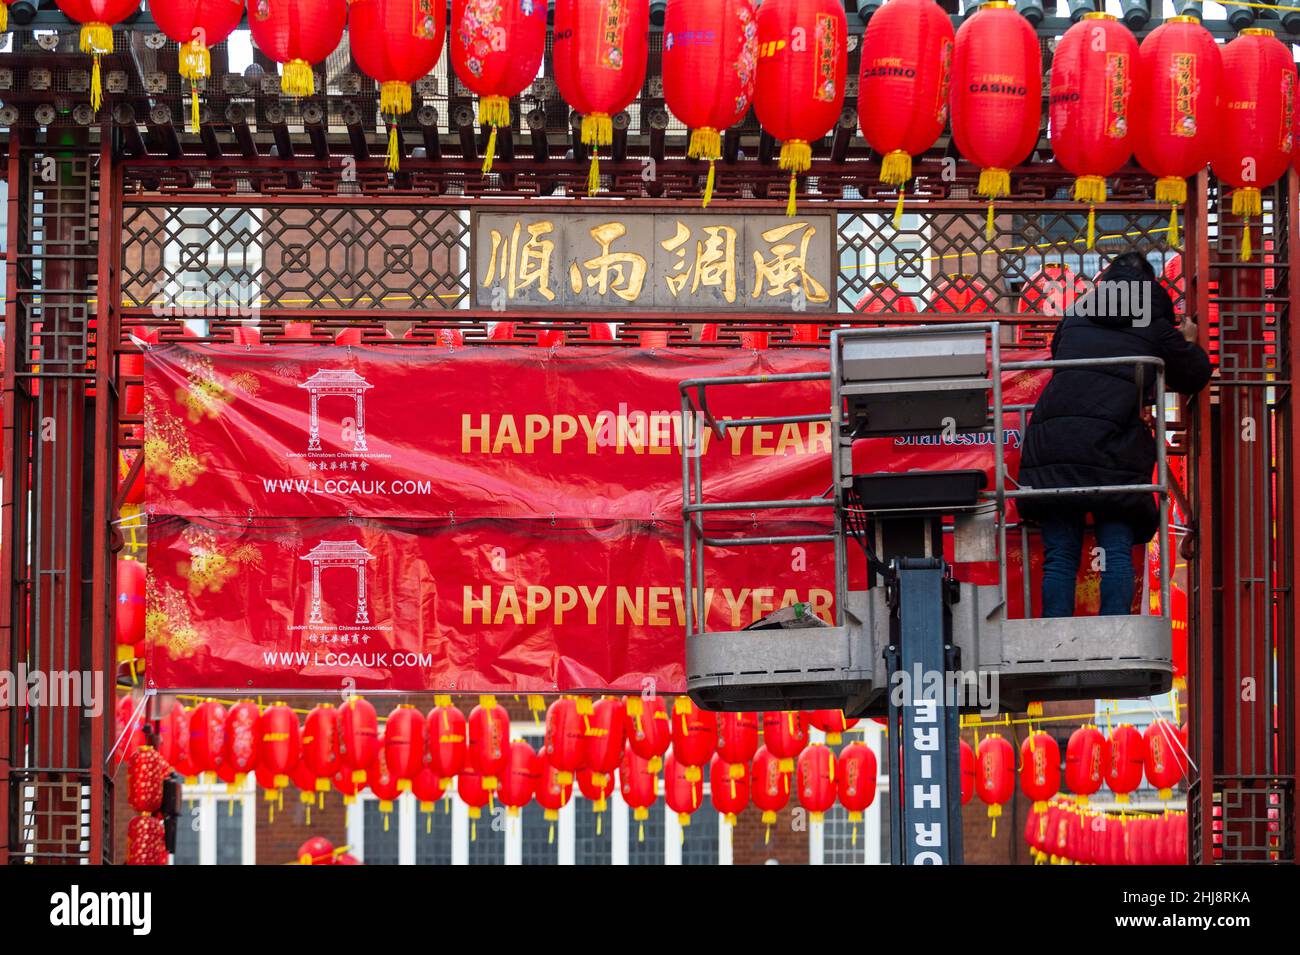 London, UK.  27 January 2022.   A workman on a cherry picker puts up signage on one of the main gates in Chinatown ahead of Chinese New Year.  The Year of the Tiger officially begins on 1 February.  Festivities in Chinatown are scaled back this year to the pandemic.  Credit: Stephen Chung / Alamy Live News Stock Photo